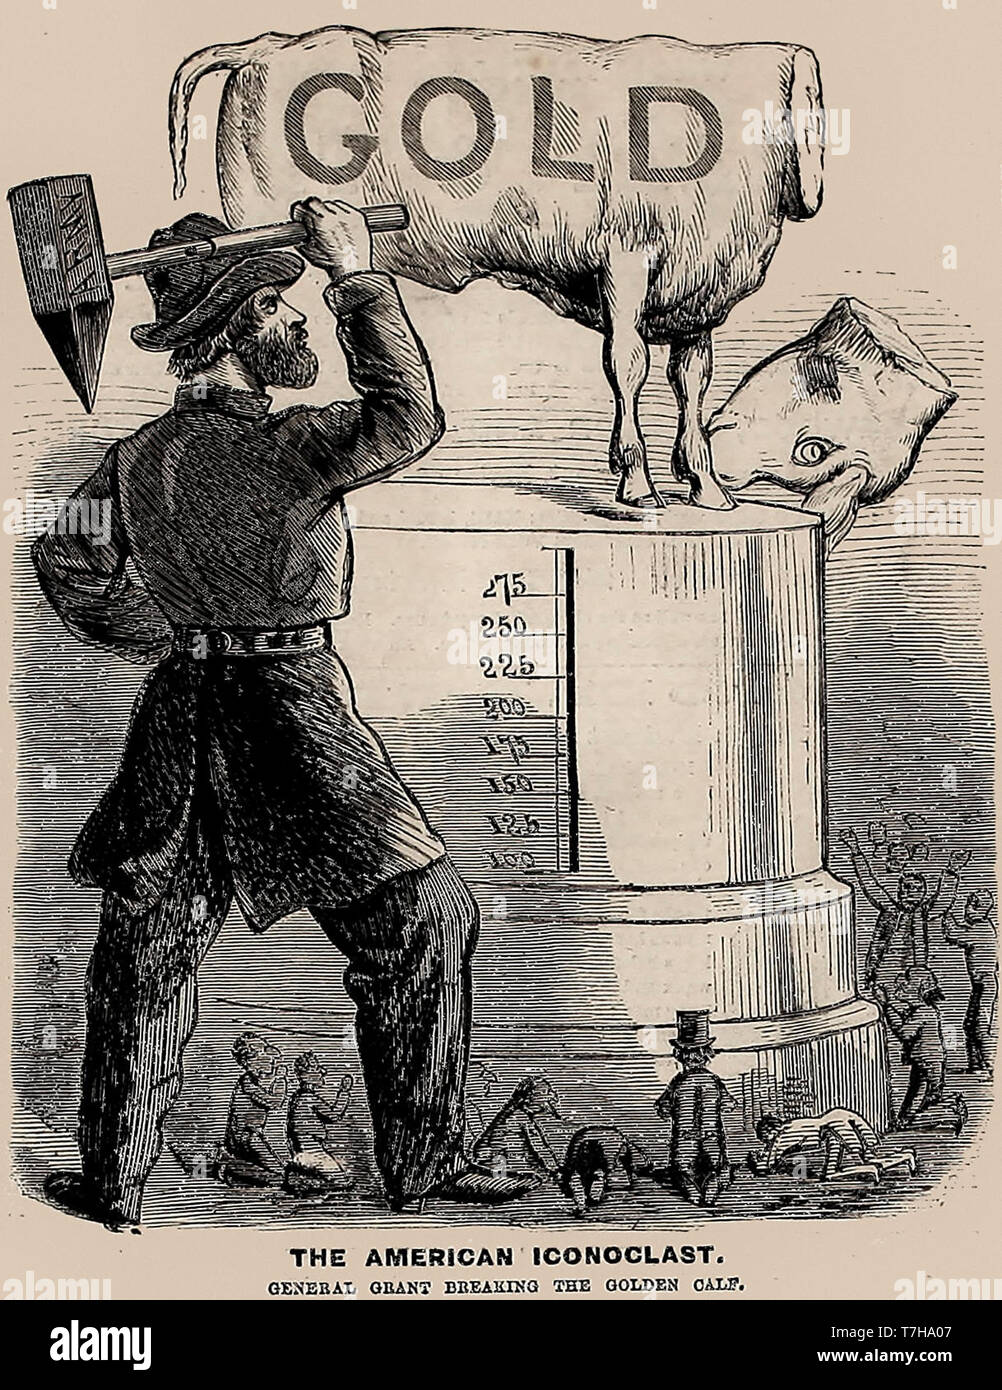 The American Iconclast - General Grant breaking the Golden Calf - American  Civil War Political Cartoon, 1864 Stock Photo - Alamy